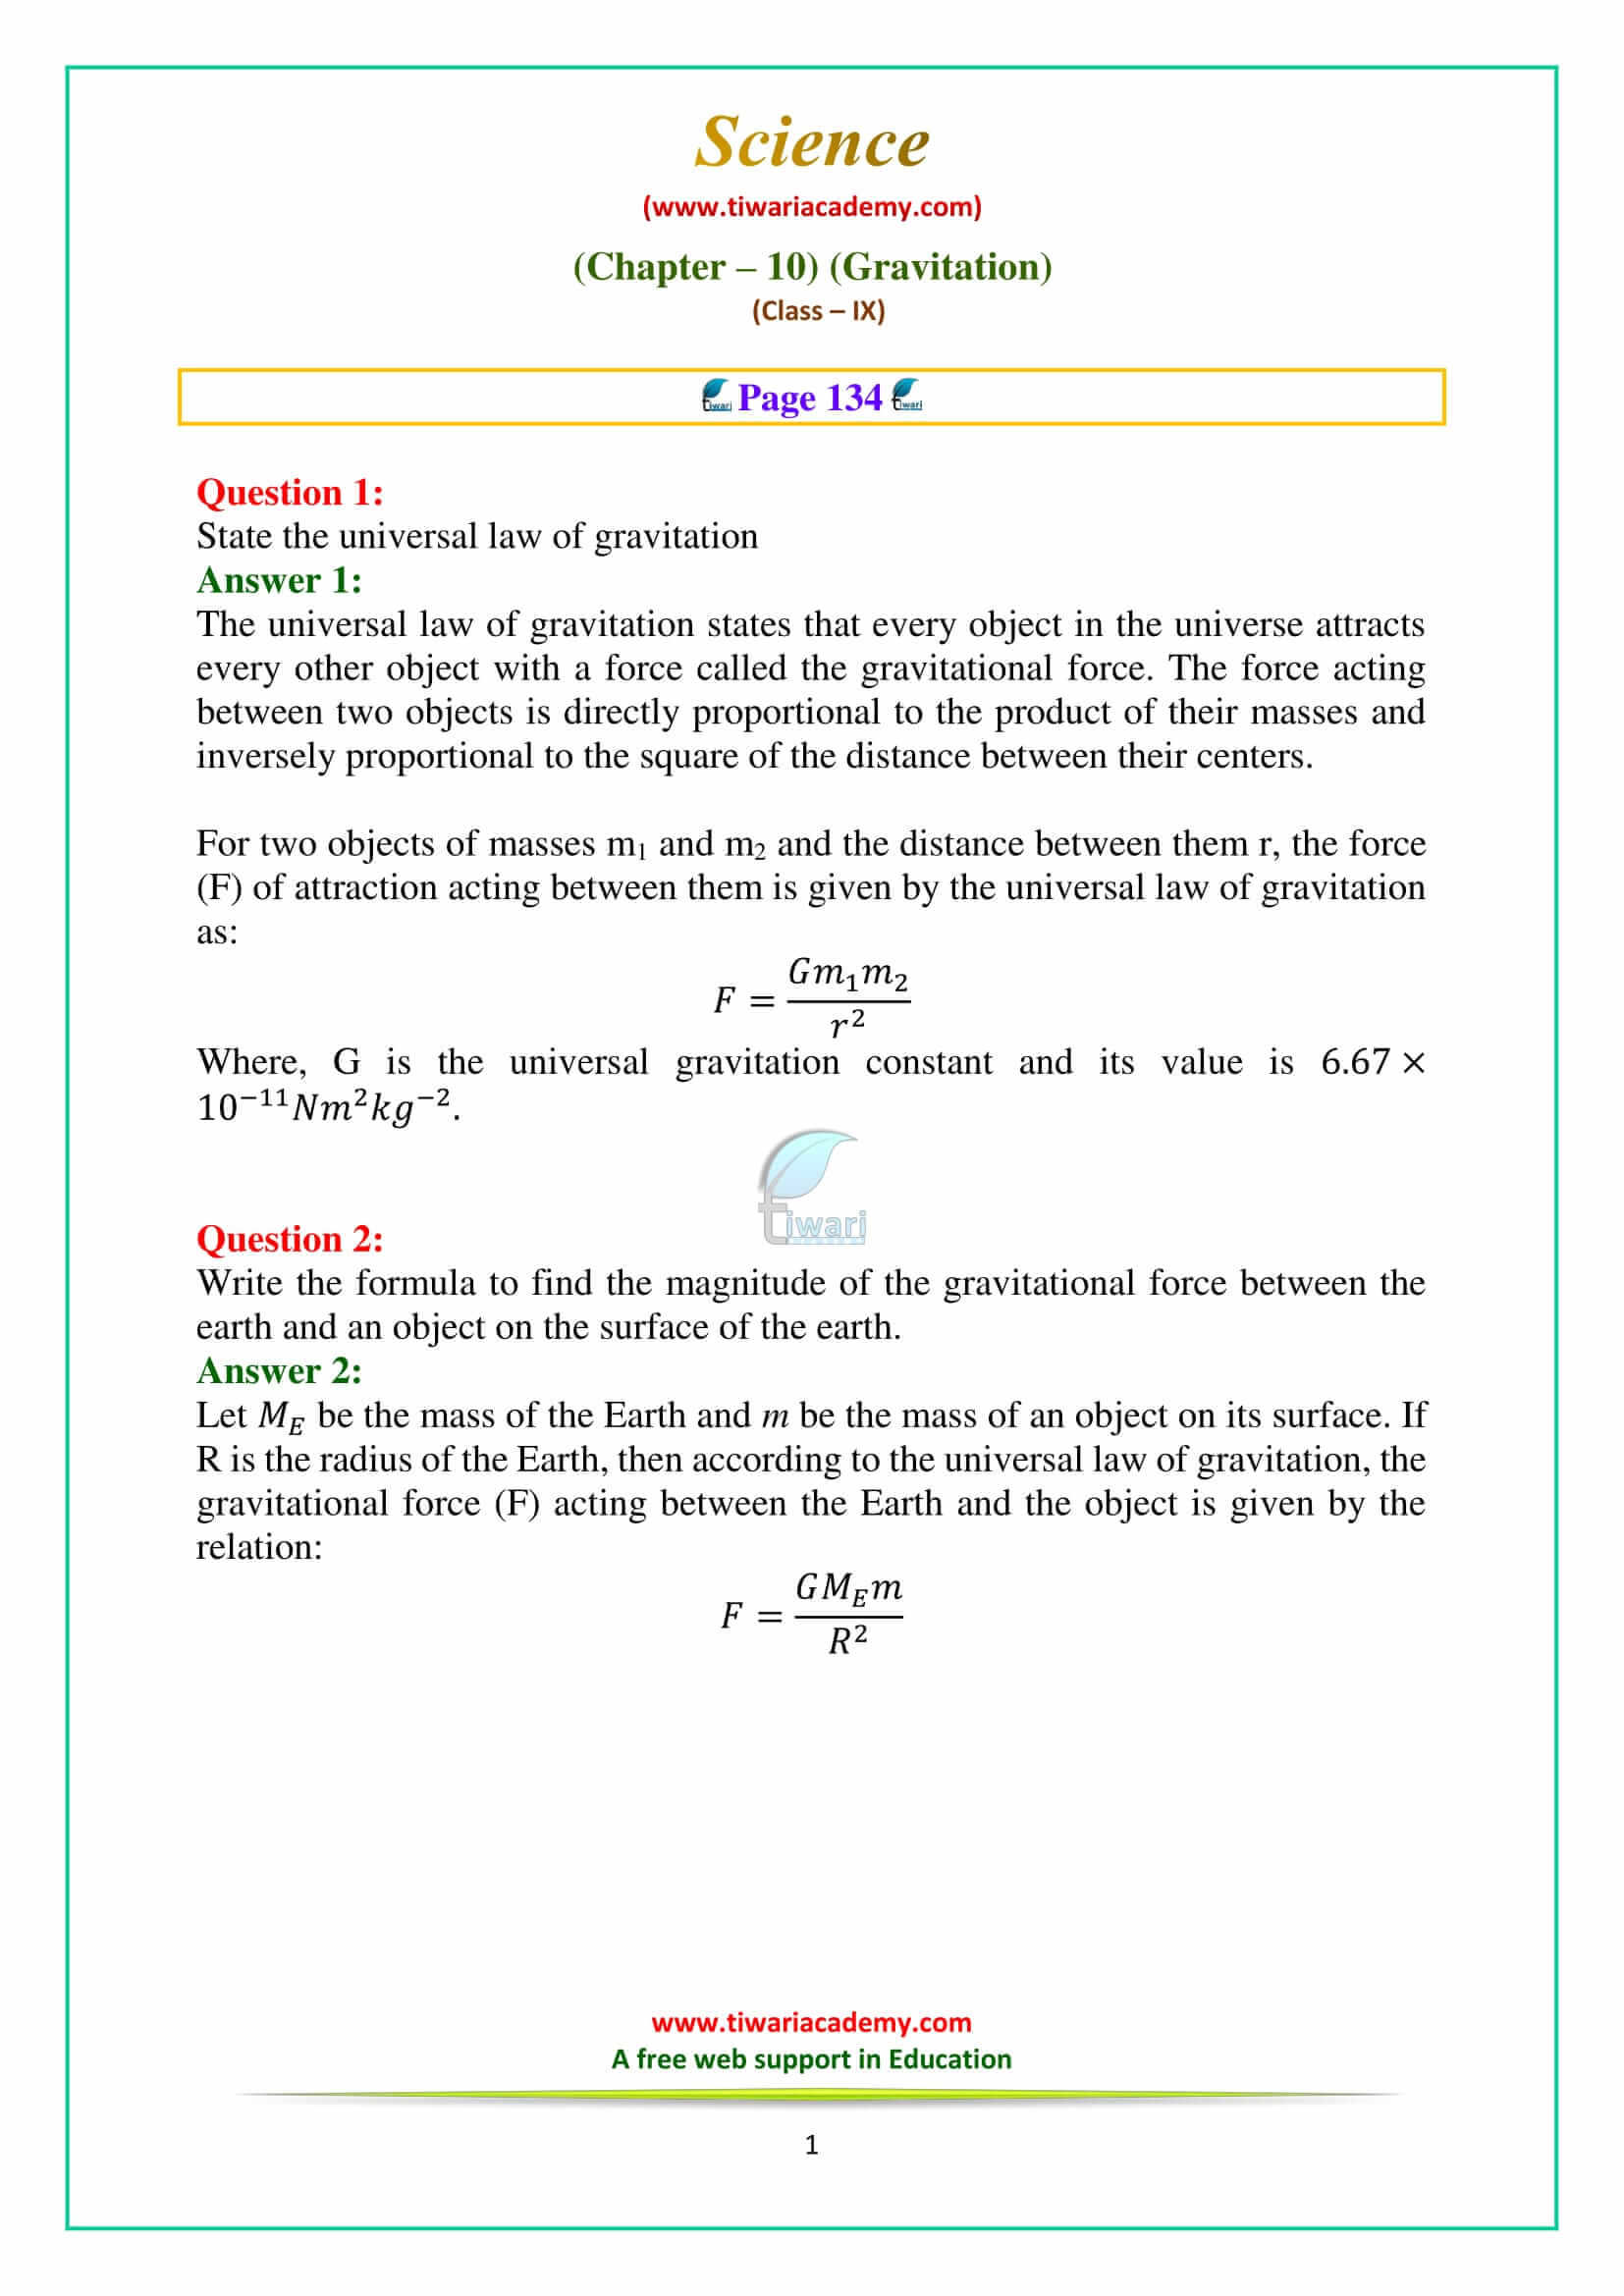 NCERT Solutions Class 9 Science Chapter 10 Gravitation Intext Questions on page 134